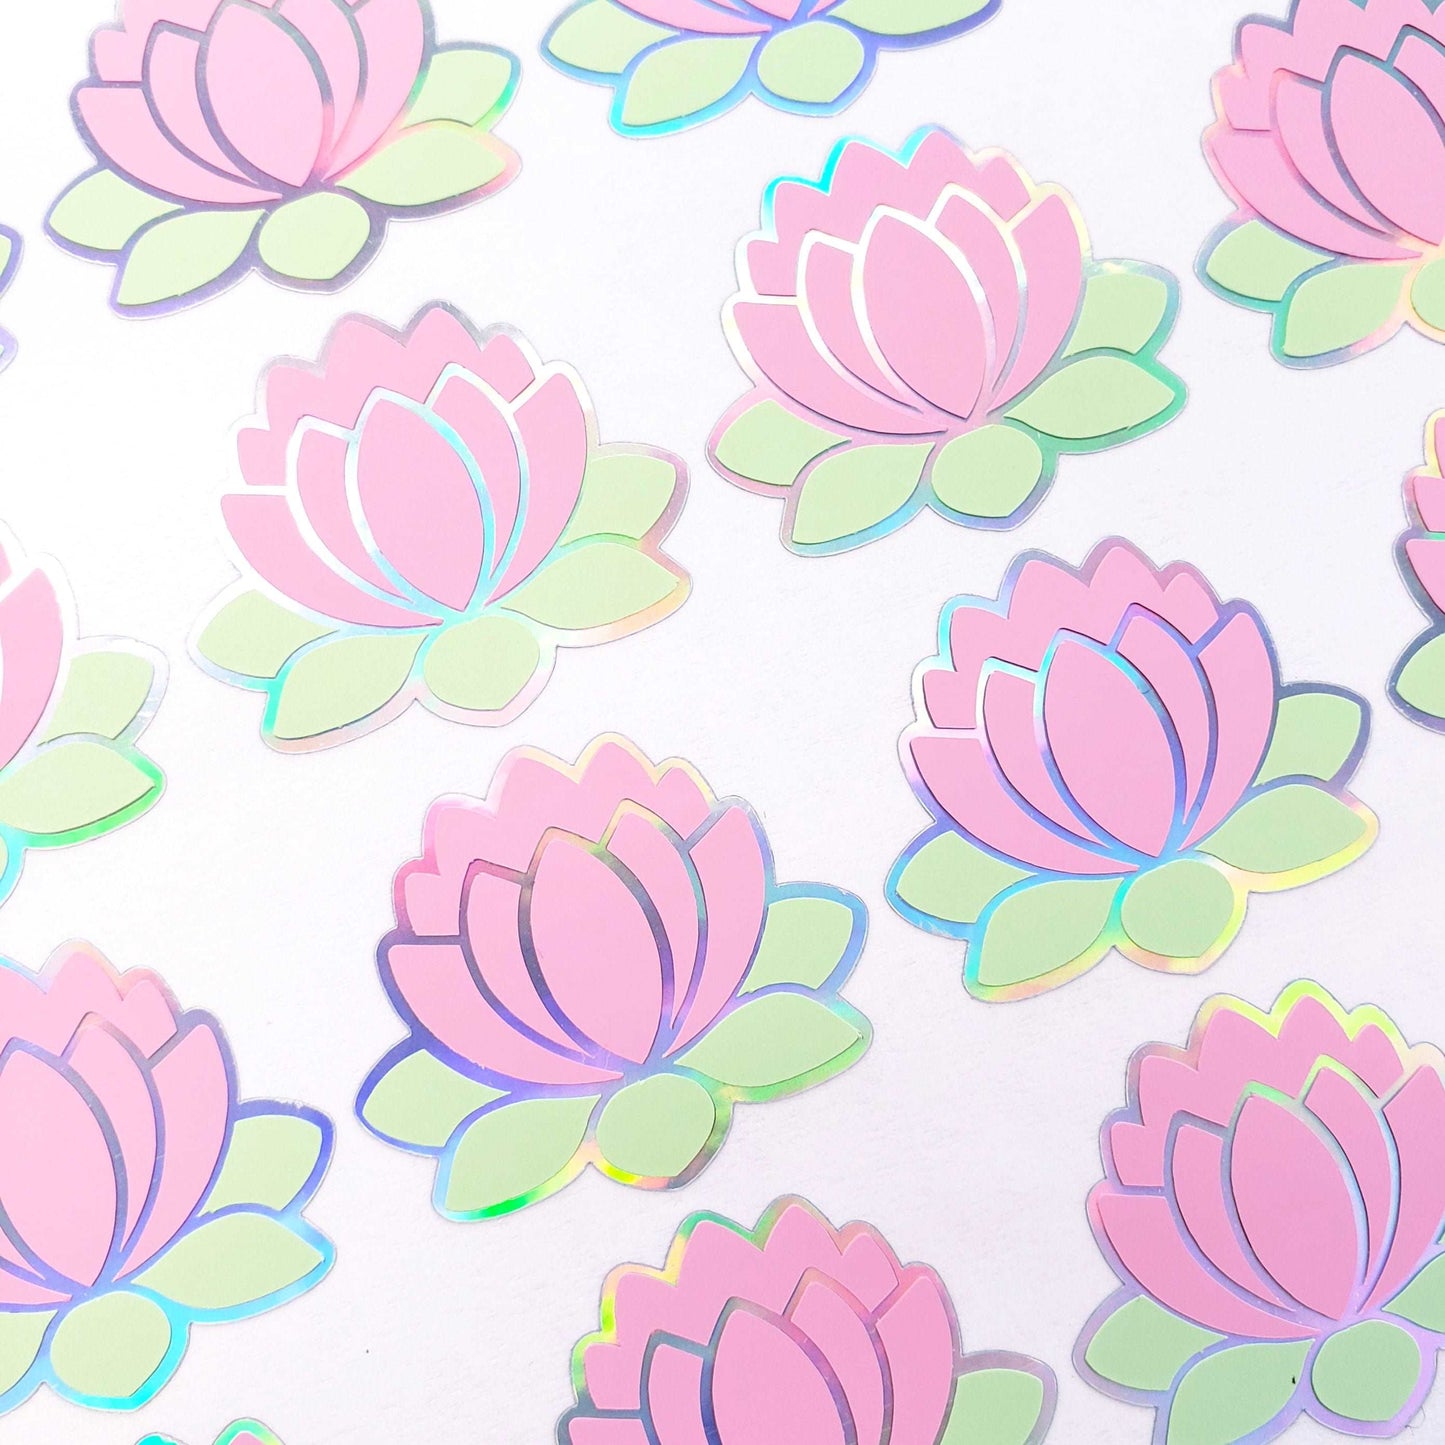 Pink Lotus Flower Stickers, set of 20 pastel light pink flower vinyl decals for Easter, Mother's Day and spring weddings. Peel and stick.